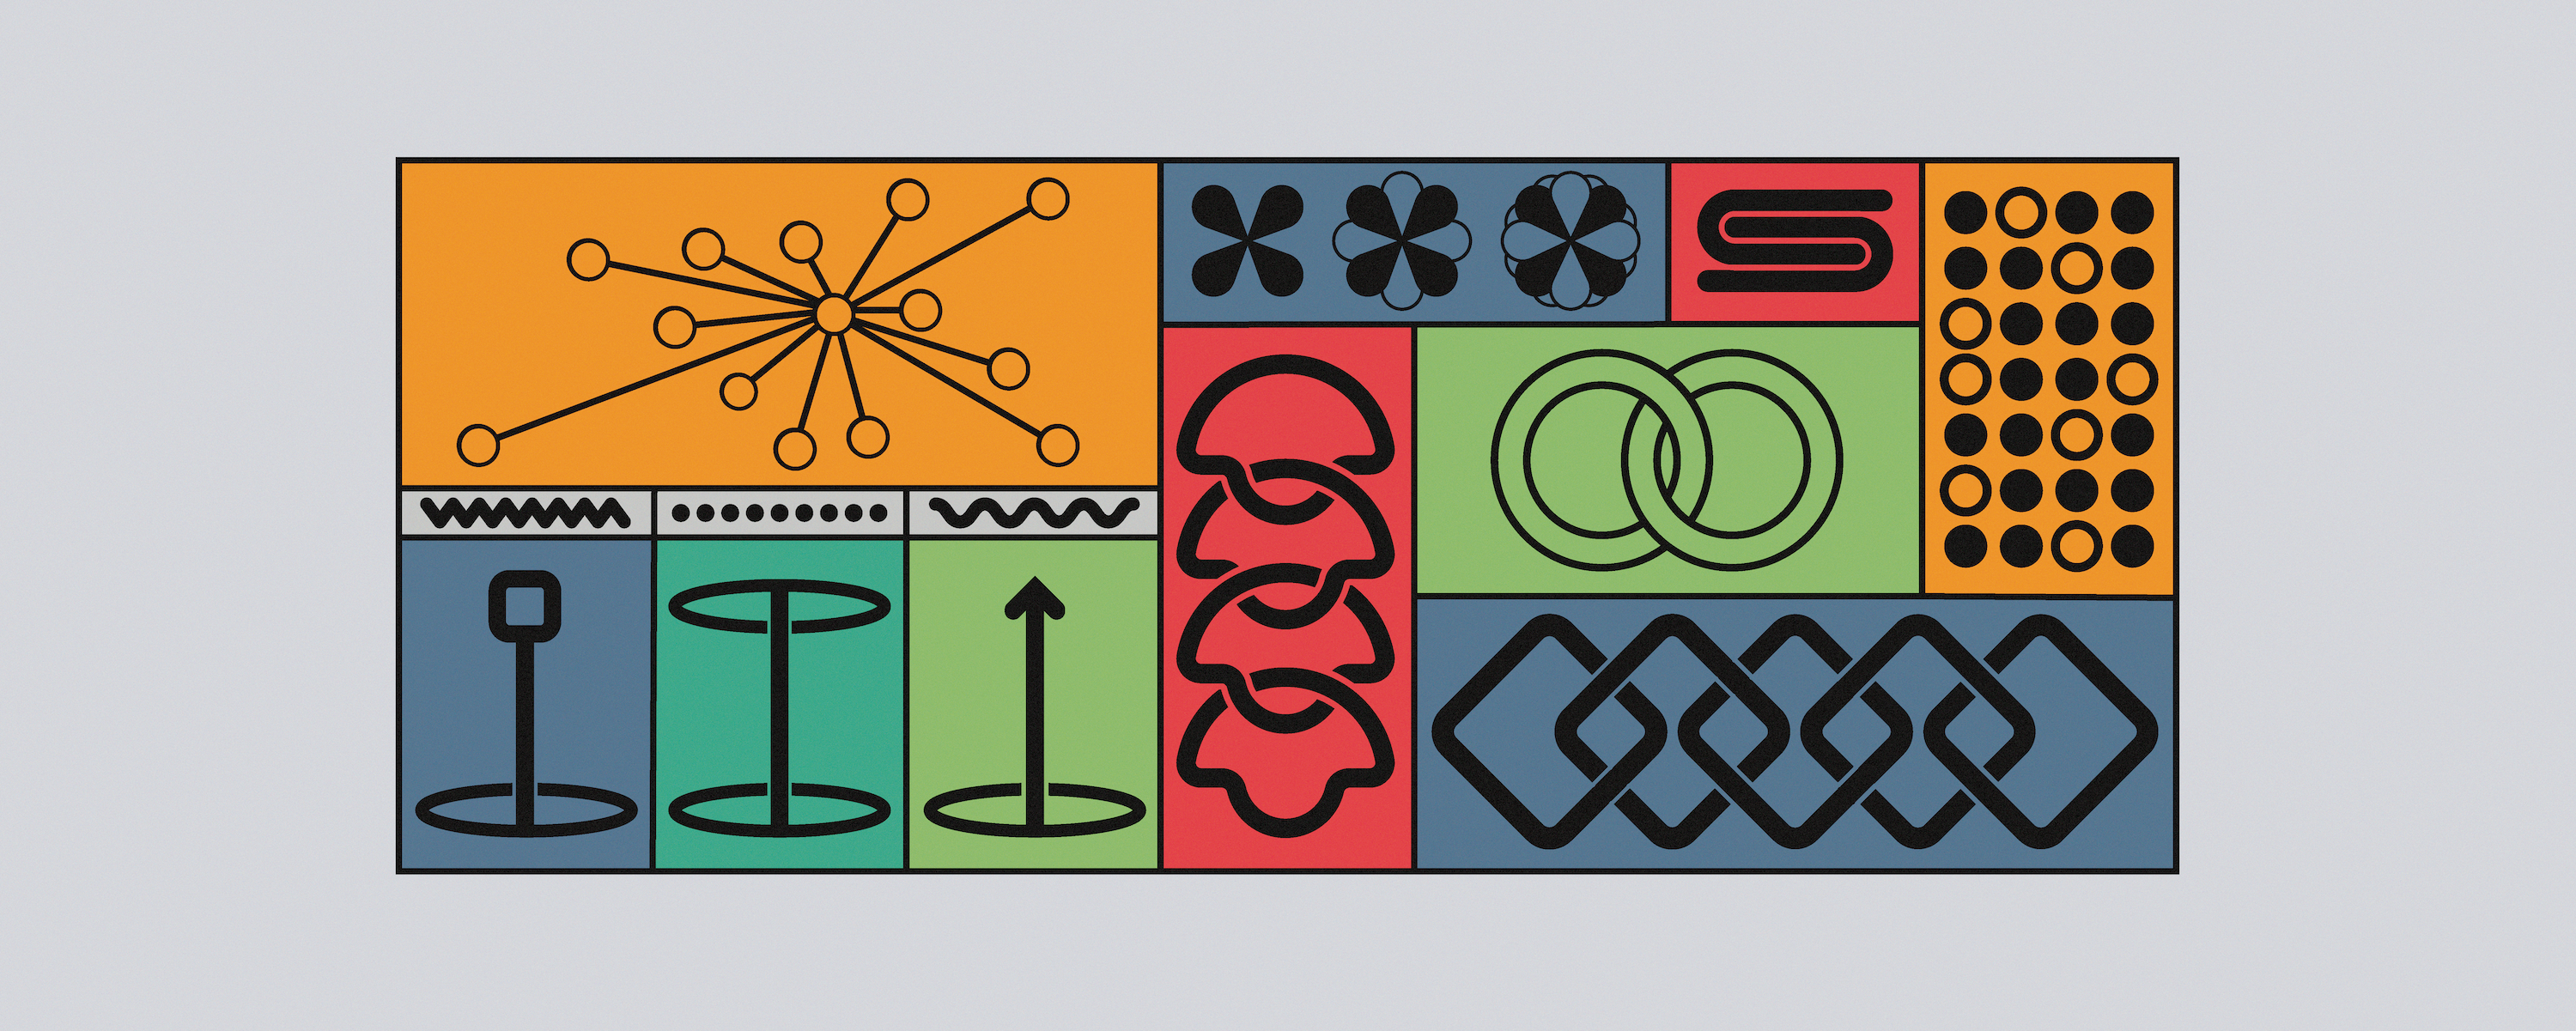 Coloured graphics and symbols positioned within rectangles